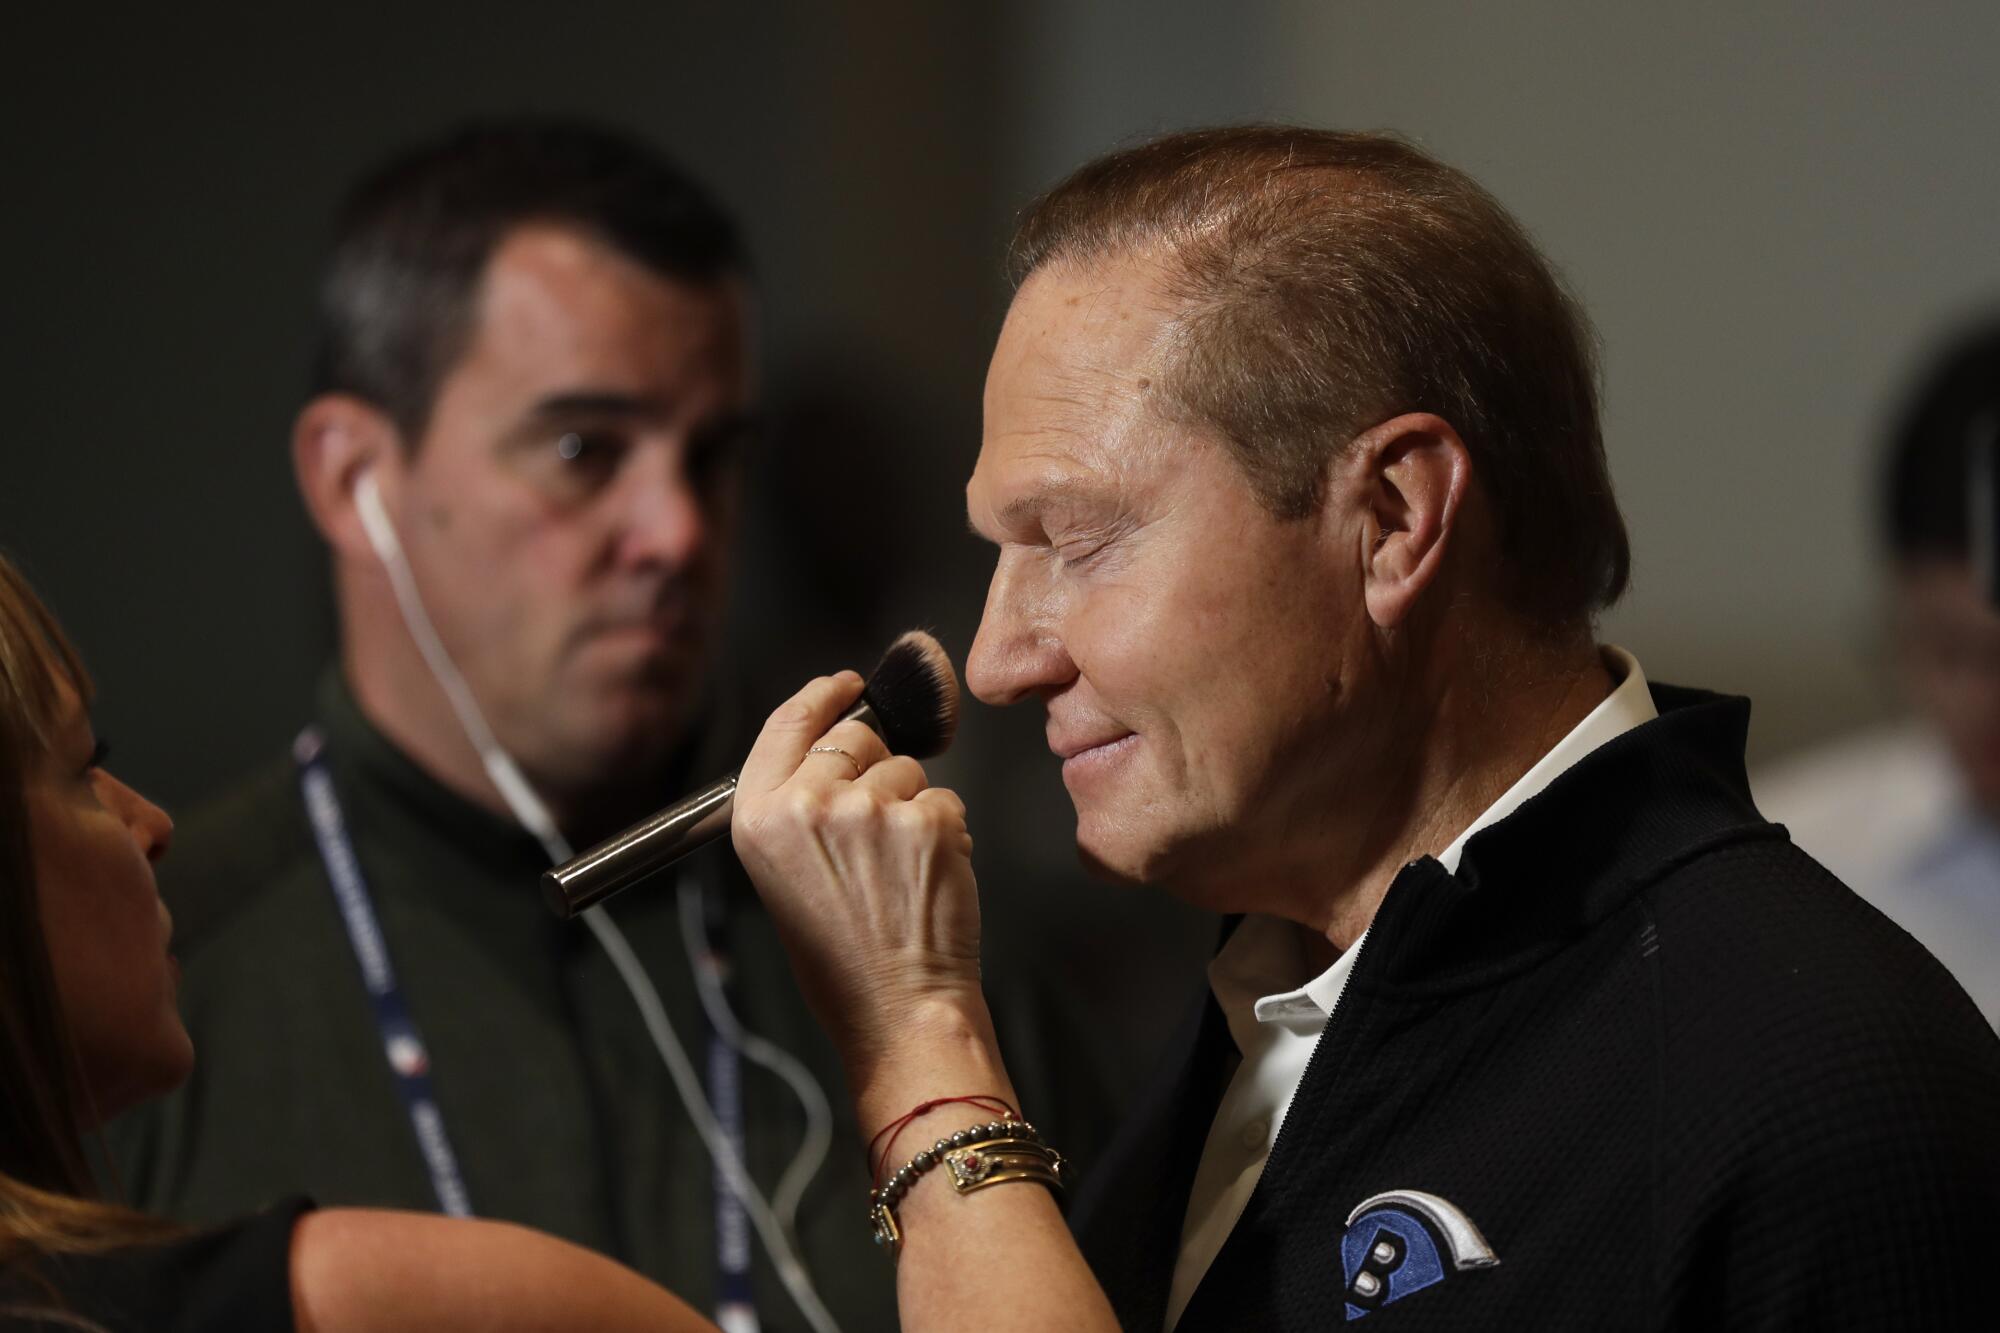 Scott Boras closes his eyes as makeup is applied to his face for a TV interview at the baseball winter meetings Dec. 10, 2019